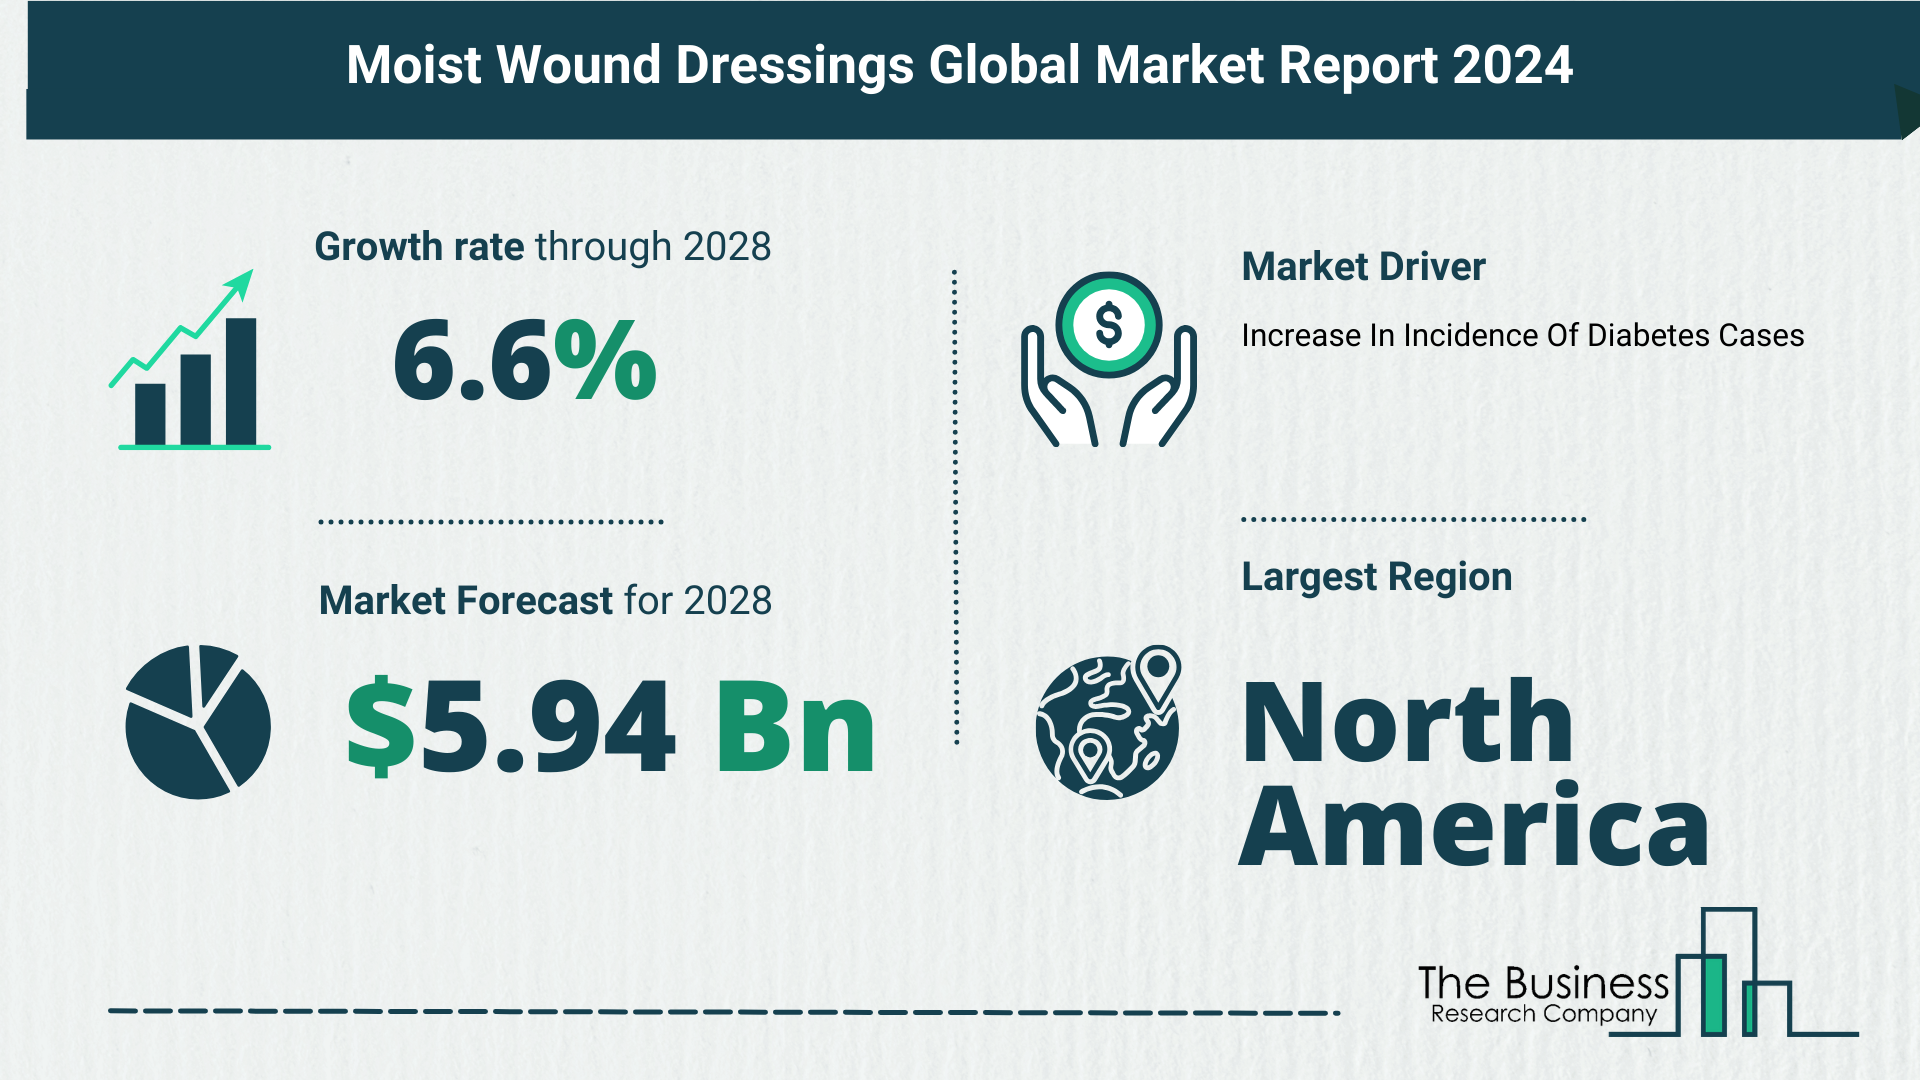 Comprehensive Analysis On Size, Share, And Drivers Of The Moist Wound Dressings Market